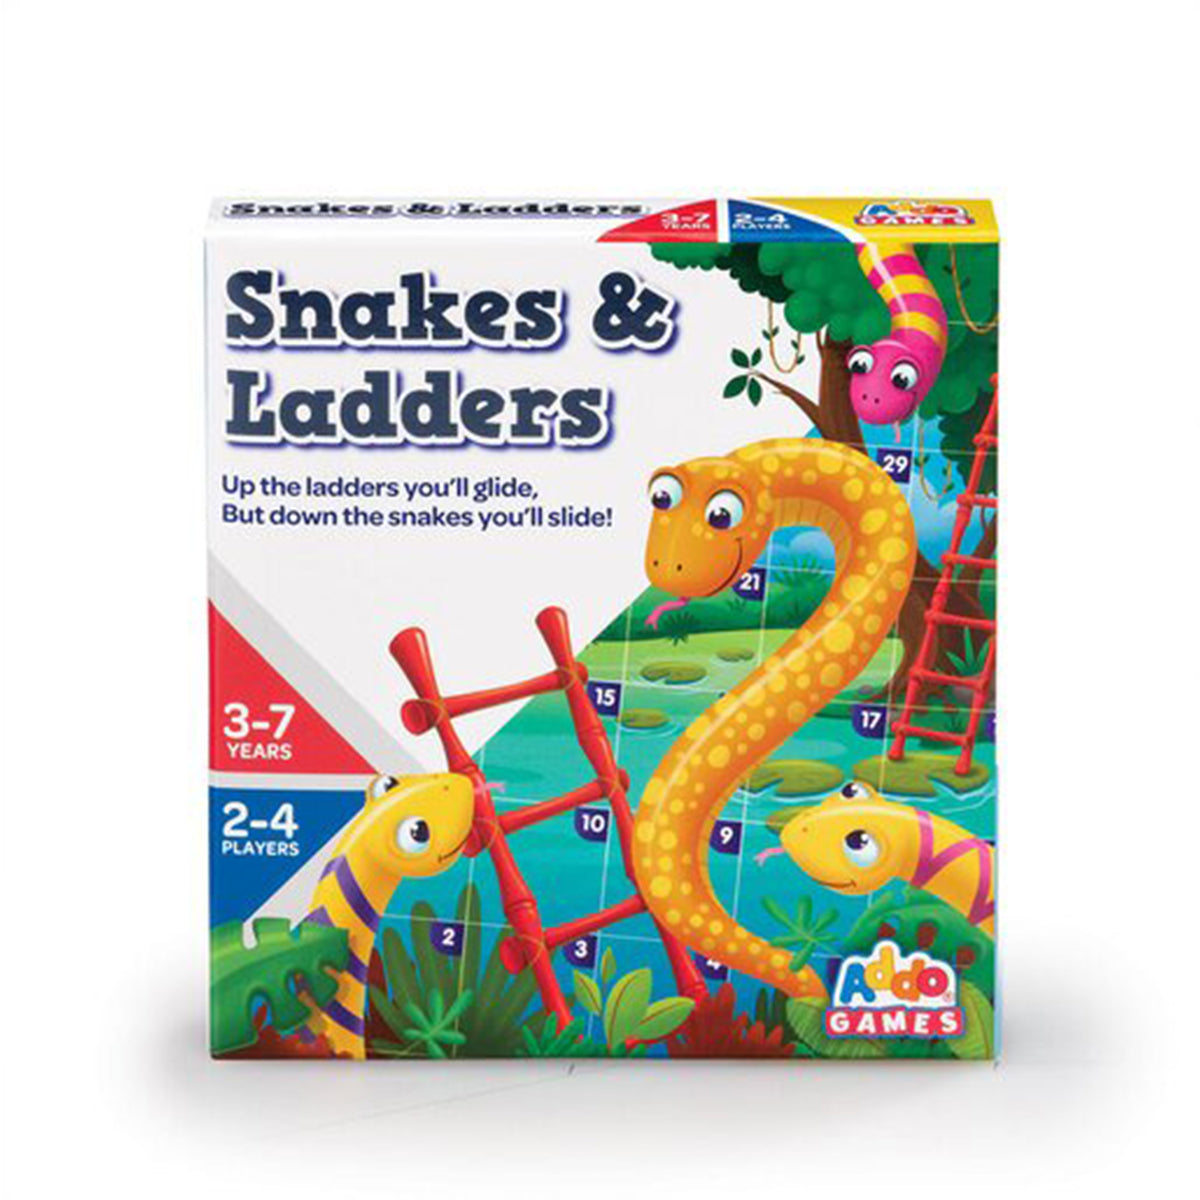 Addo Games - Snakes & Ladders Mini Card Game